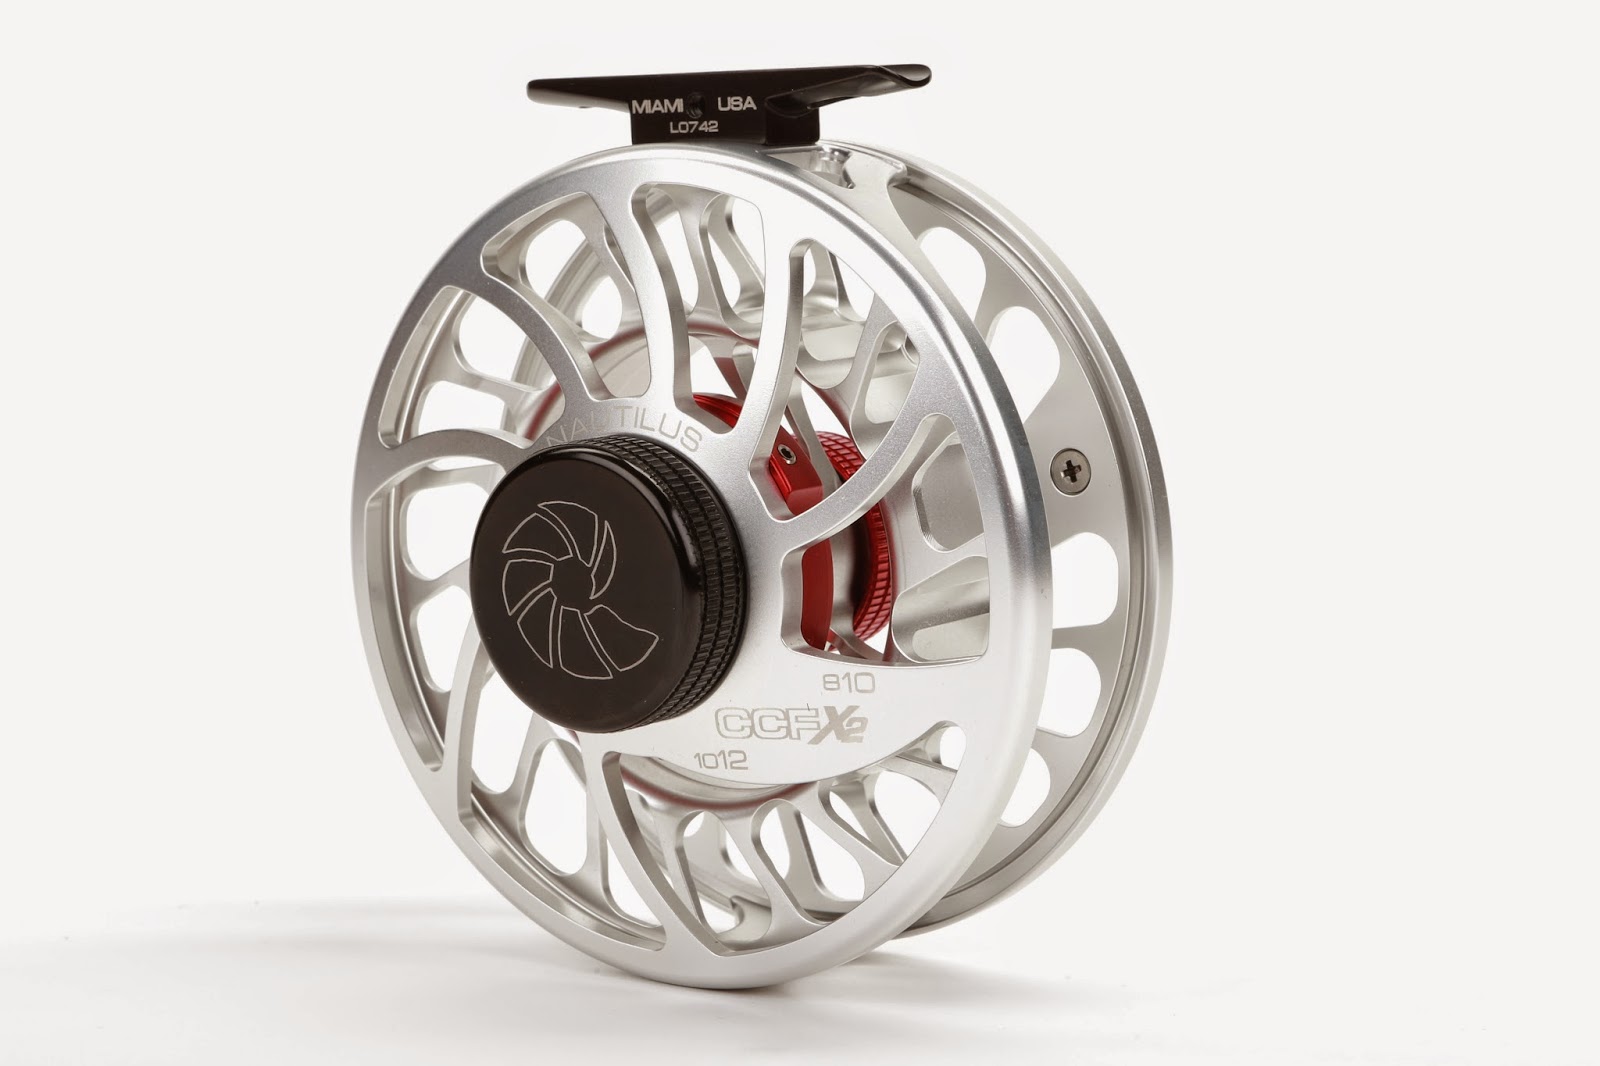 Gorge Fly Shop Blog: Nautilus Fly Reels - Then and Now!